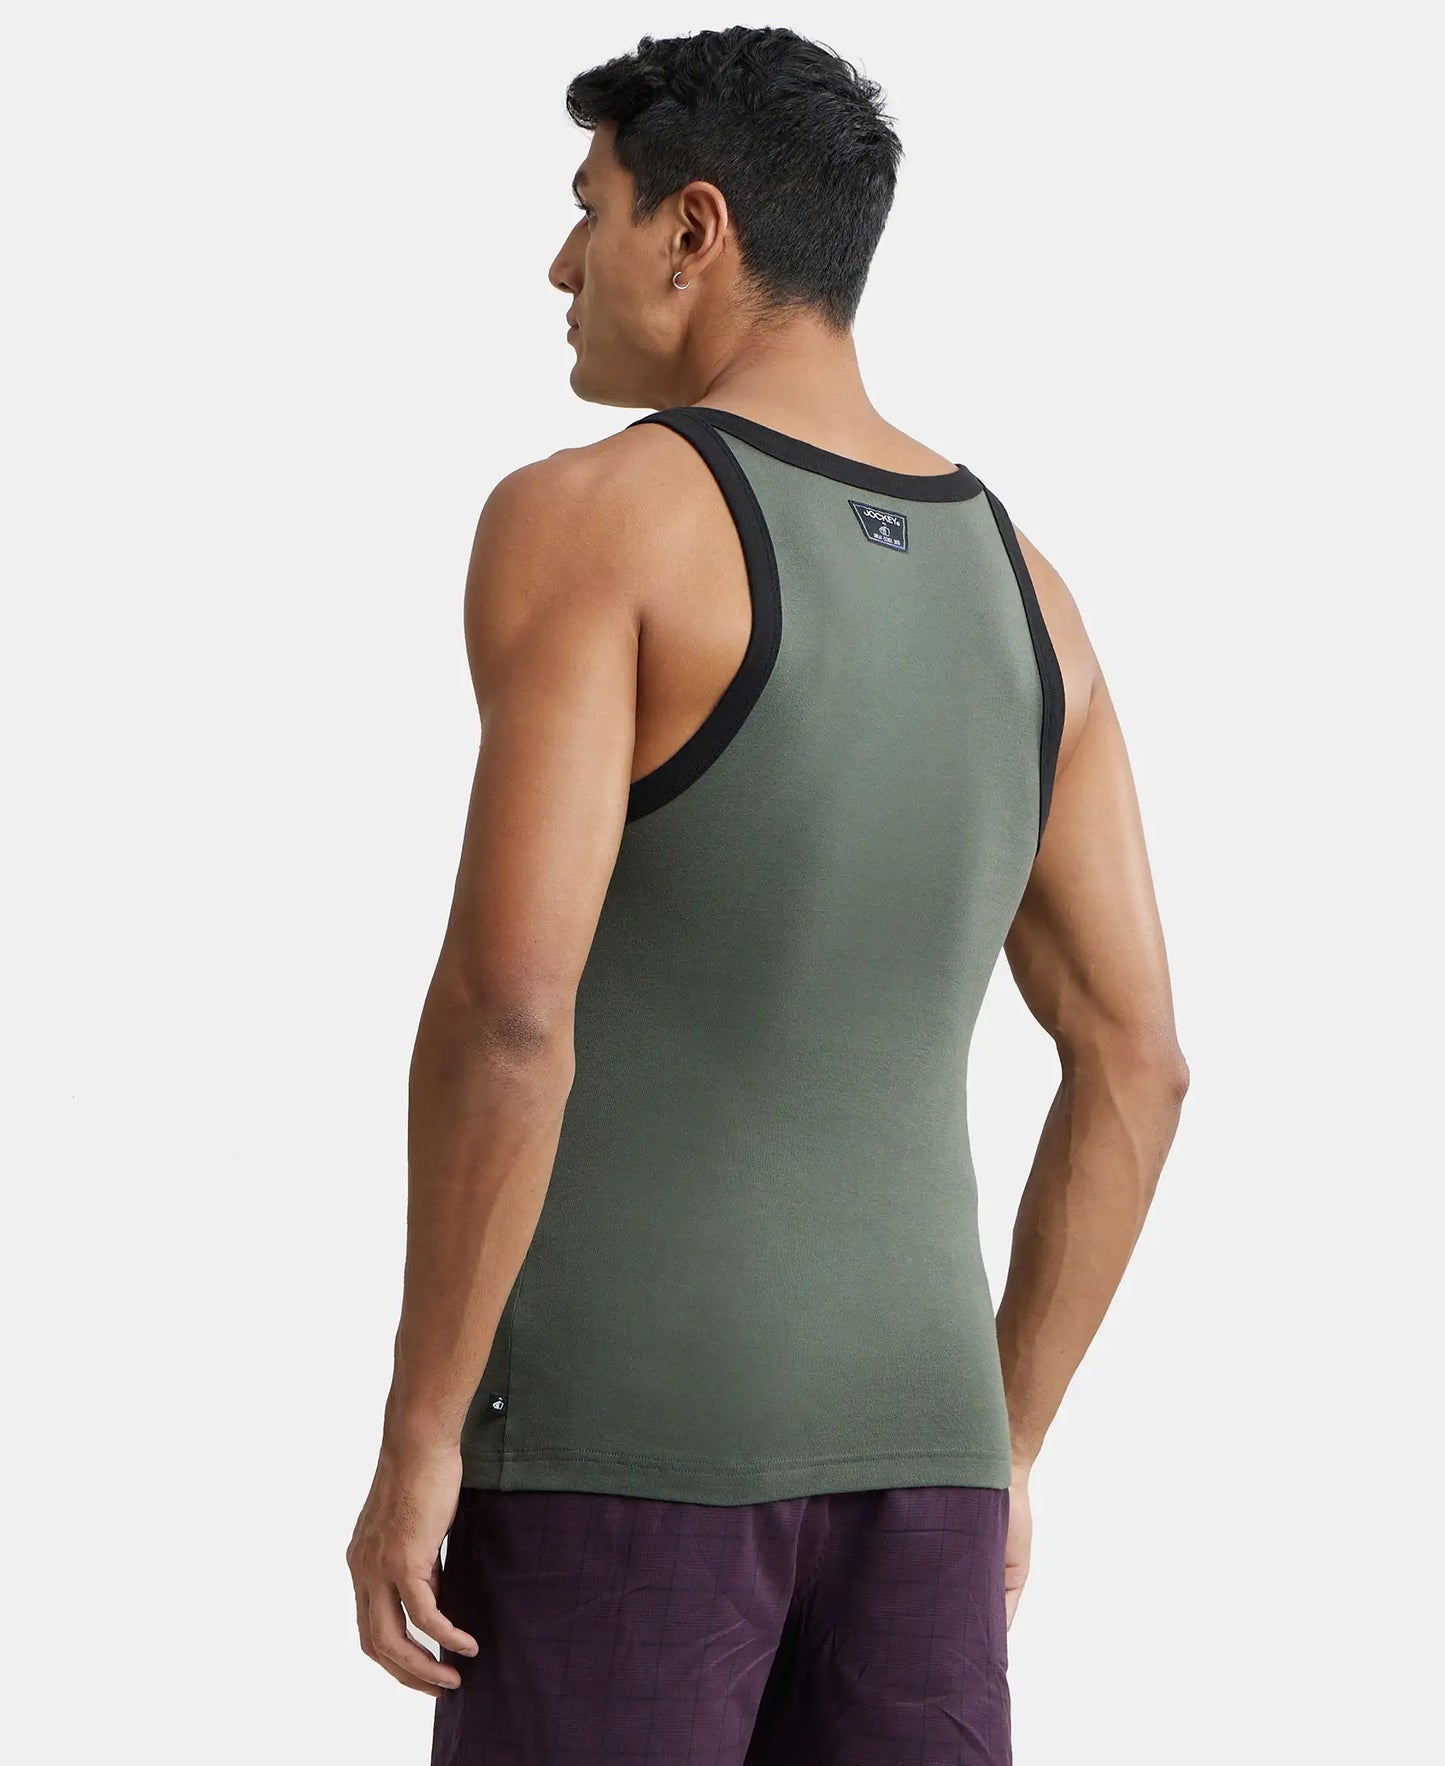 Super Combed Cotton Rib Square Neck Gym Vest - Deep Olive with Assorted Bias-3